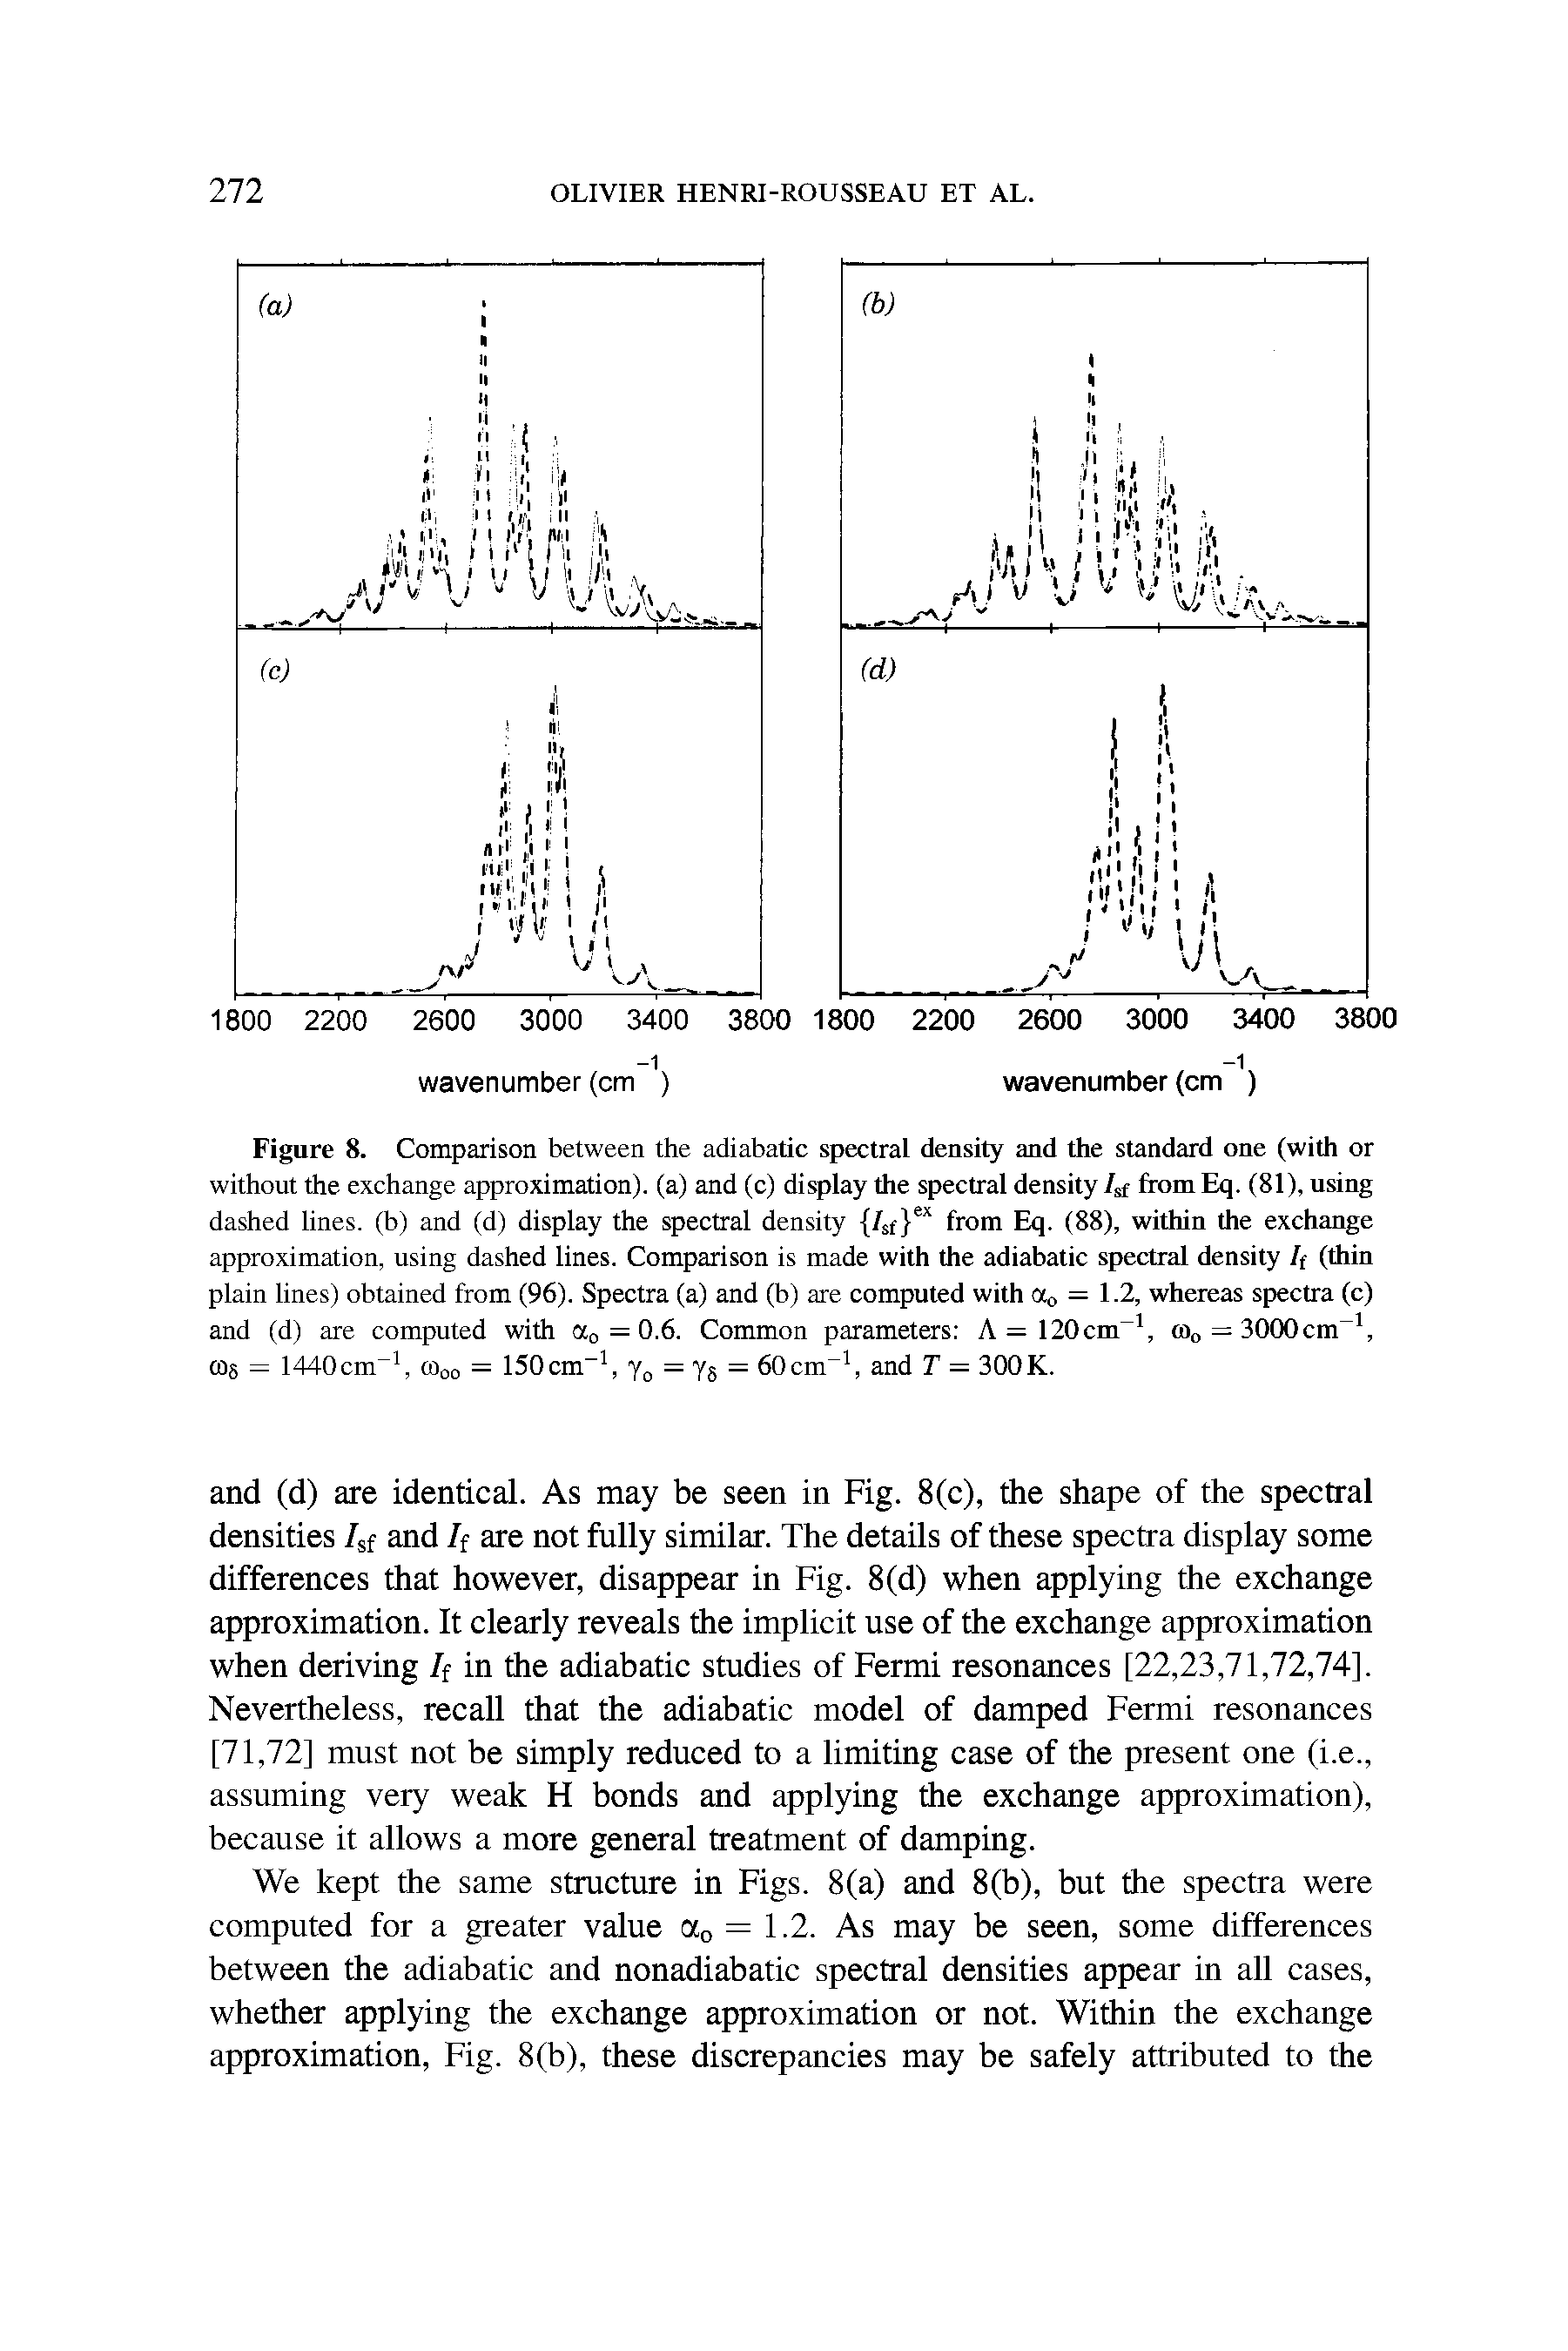 Figure 8. Comparison between the adiabatic spectral density and the standard one (with or without the exchange approximation), (a) and (c) display the spectral density Isf from Eq. (81), using dashed lines, (b) and (d) display the spectral density /sf ex from Eq. (88), within the exchange approximation, using dashed lines. Comparison is made with the adiabatic spectral density If (thin plain lines) obtained from (96). Spectra (a) and (b) are computed with Oo = 1.2, whereas spectra (c) and (d) are computed with a0 = 0.6. Common parameters A = 120cm-1, (n0 = 3000cm-1, C05 = 1440 cm-1, co00 = 150 cm-1, y0 = y5 = 60 cm-1, and T = 300 K.